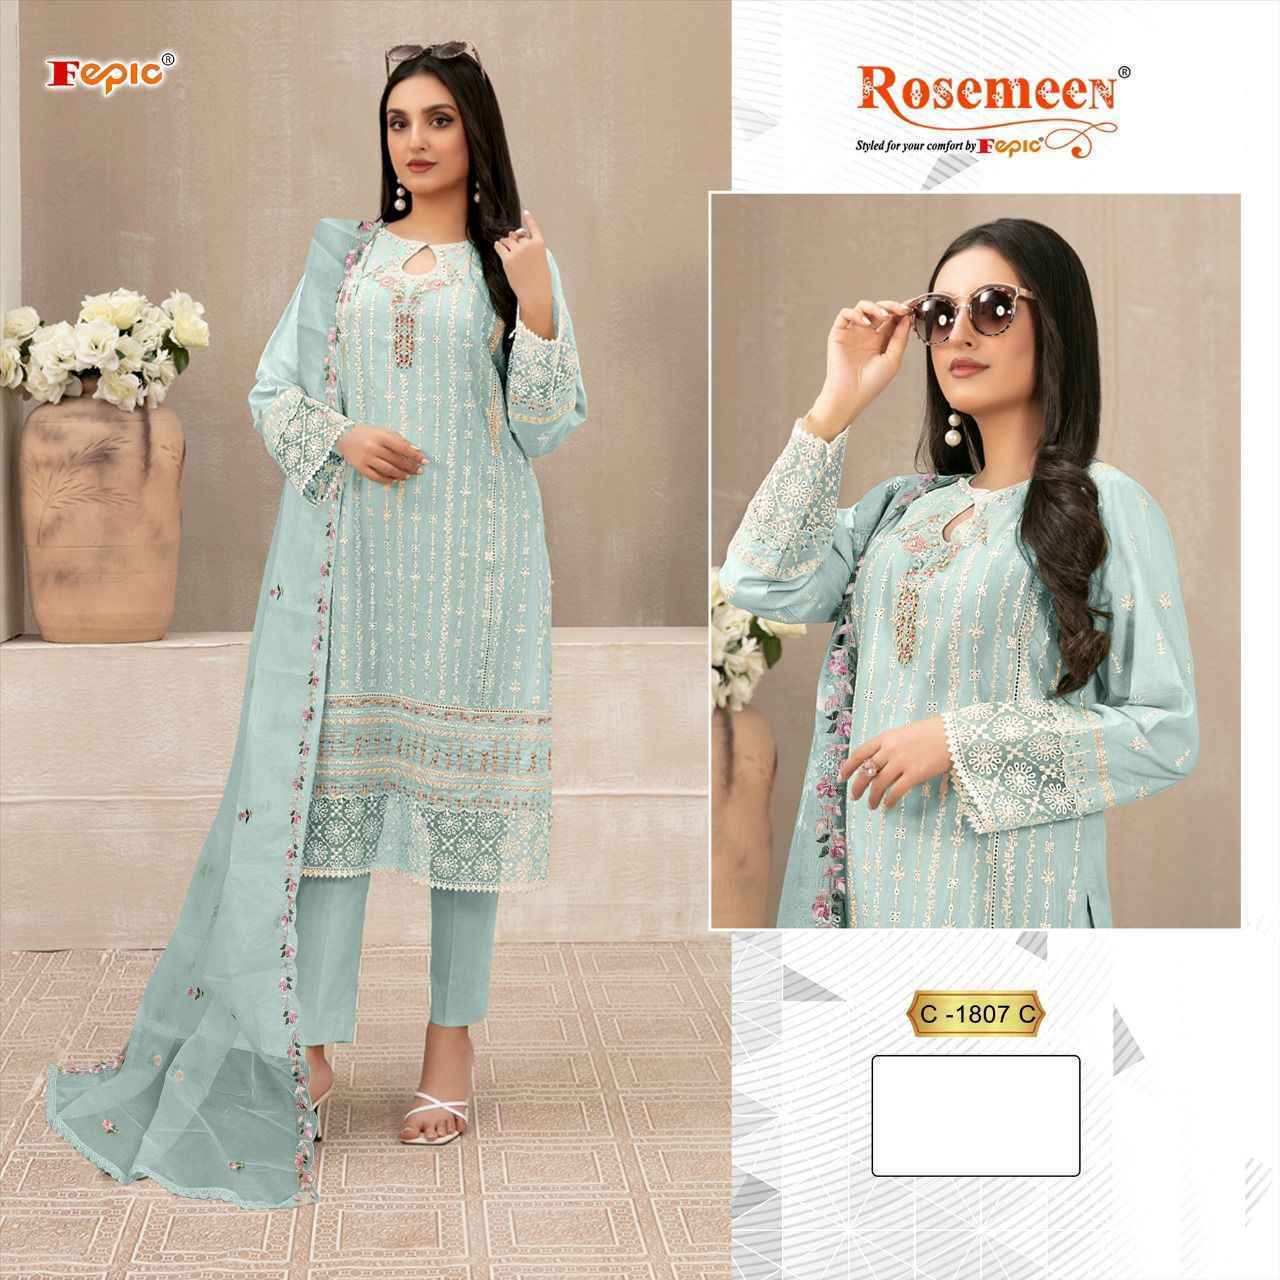 Fepic Rosemeen C-1807 Georgette Embroidered Dress Material 3 Pc Catalog